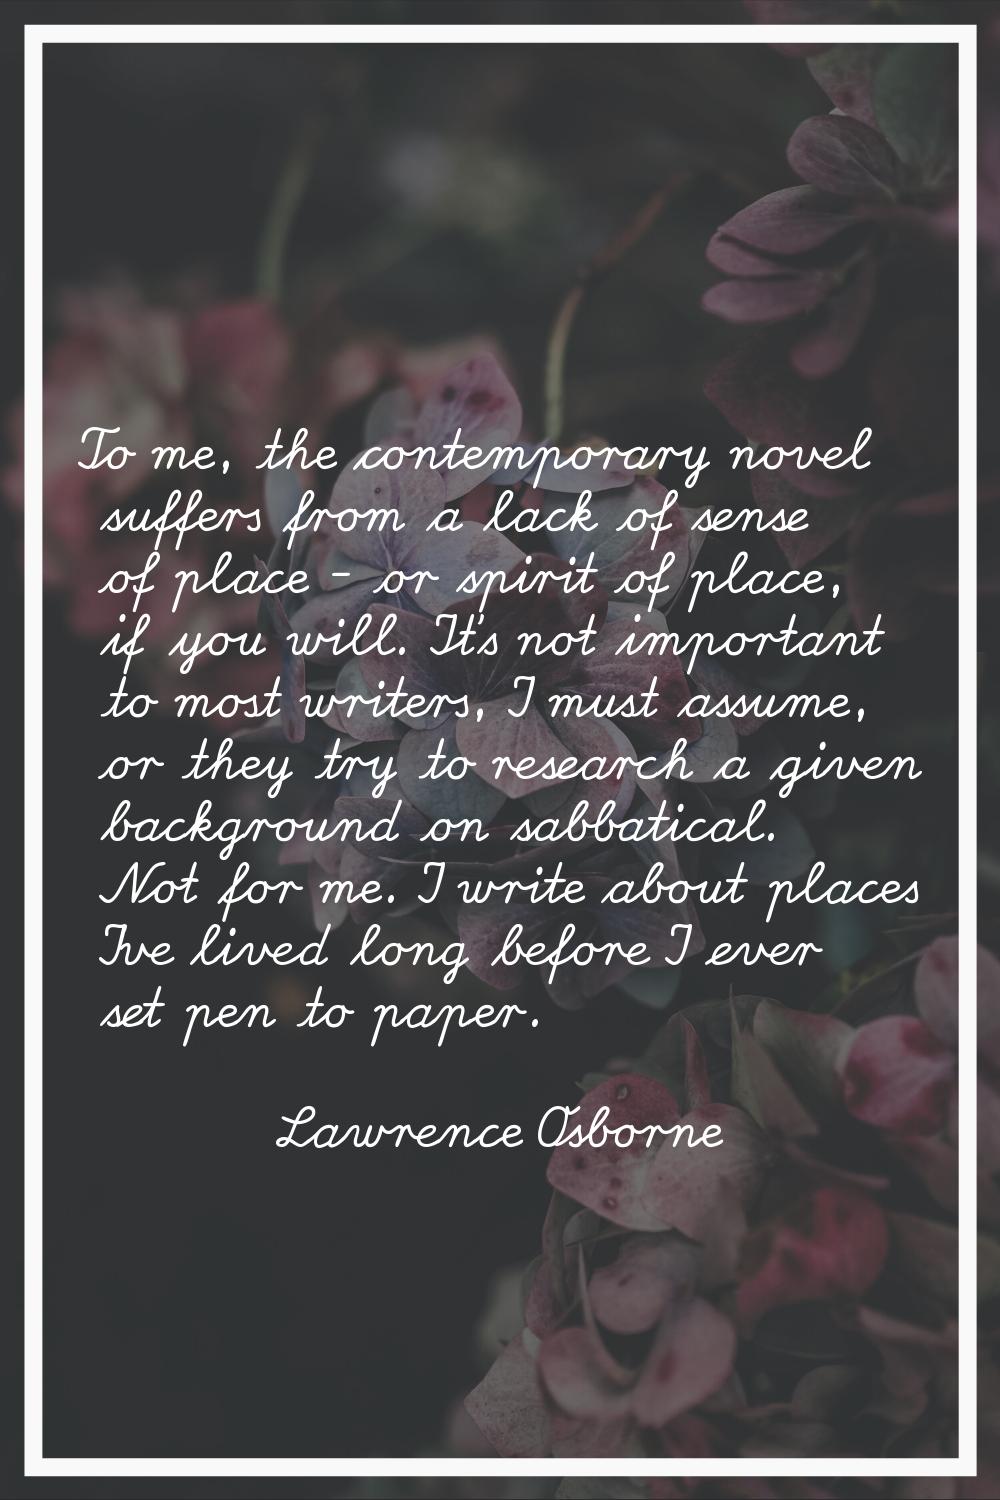 To me, the contemporary novel suffers from a lack of sense of place - or spirit of place, if you wi